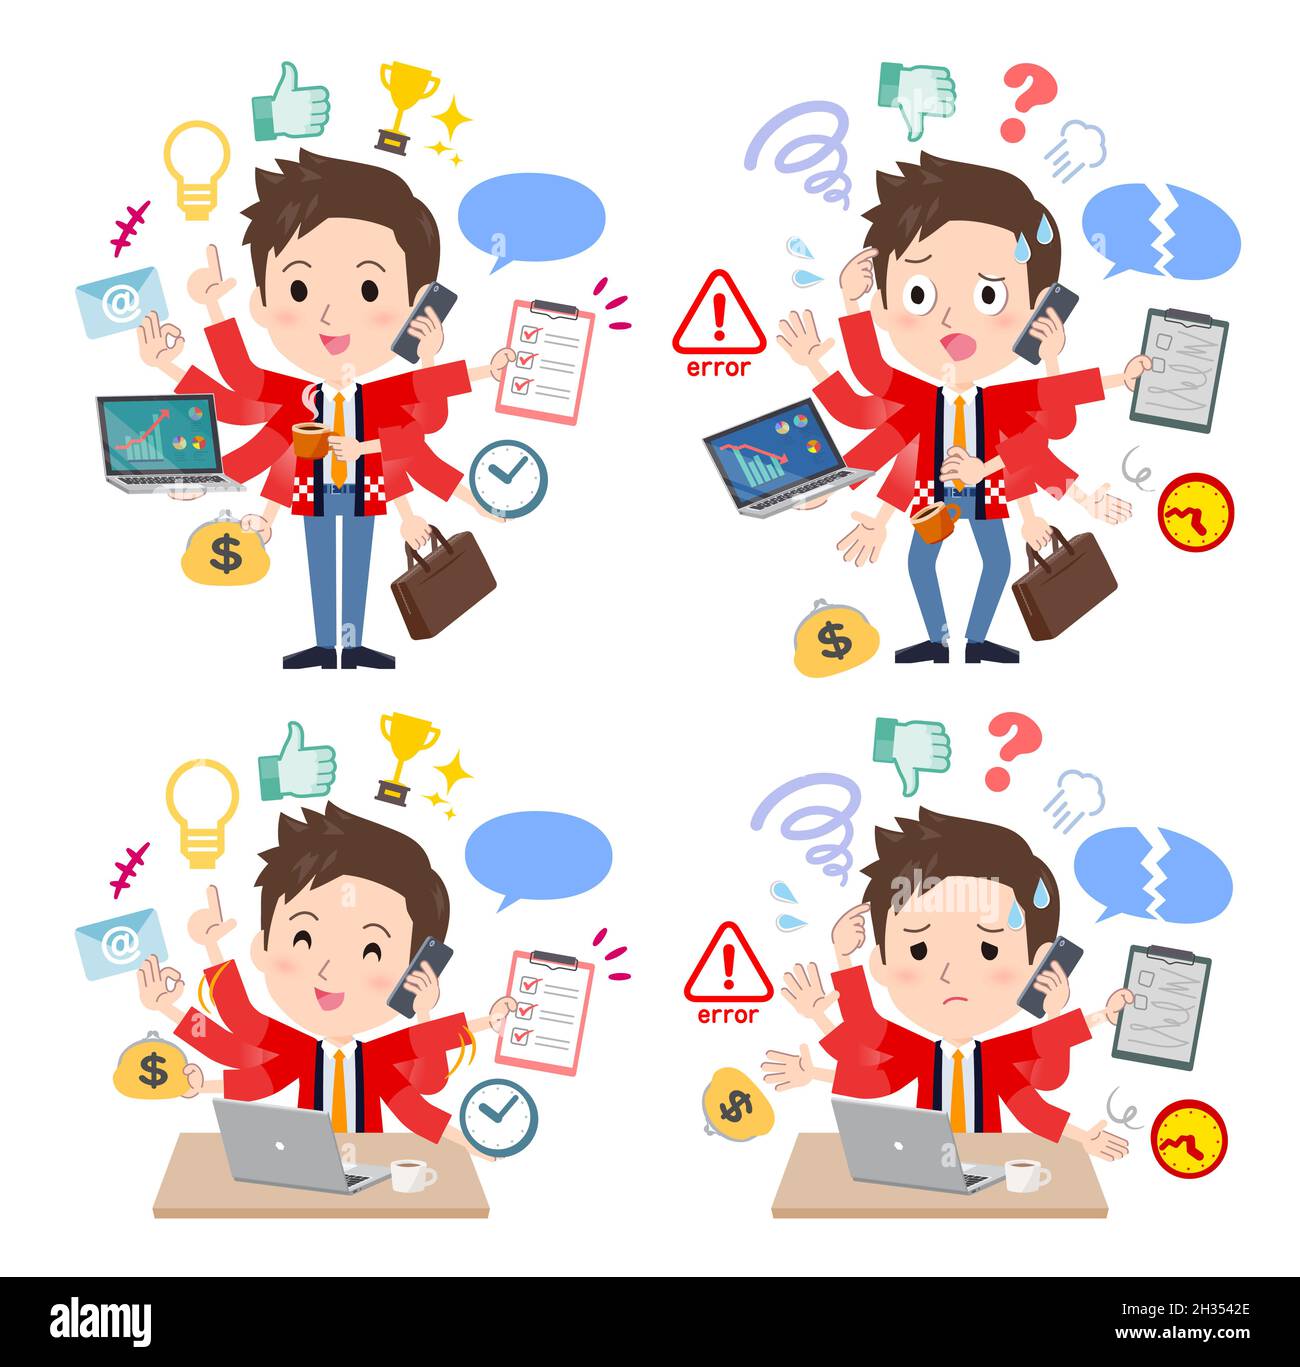 A set of wearing a happi coat man who perform multitasking in the office.It's vector art so easy to edit. Stock Vector